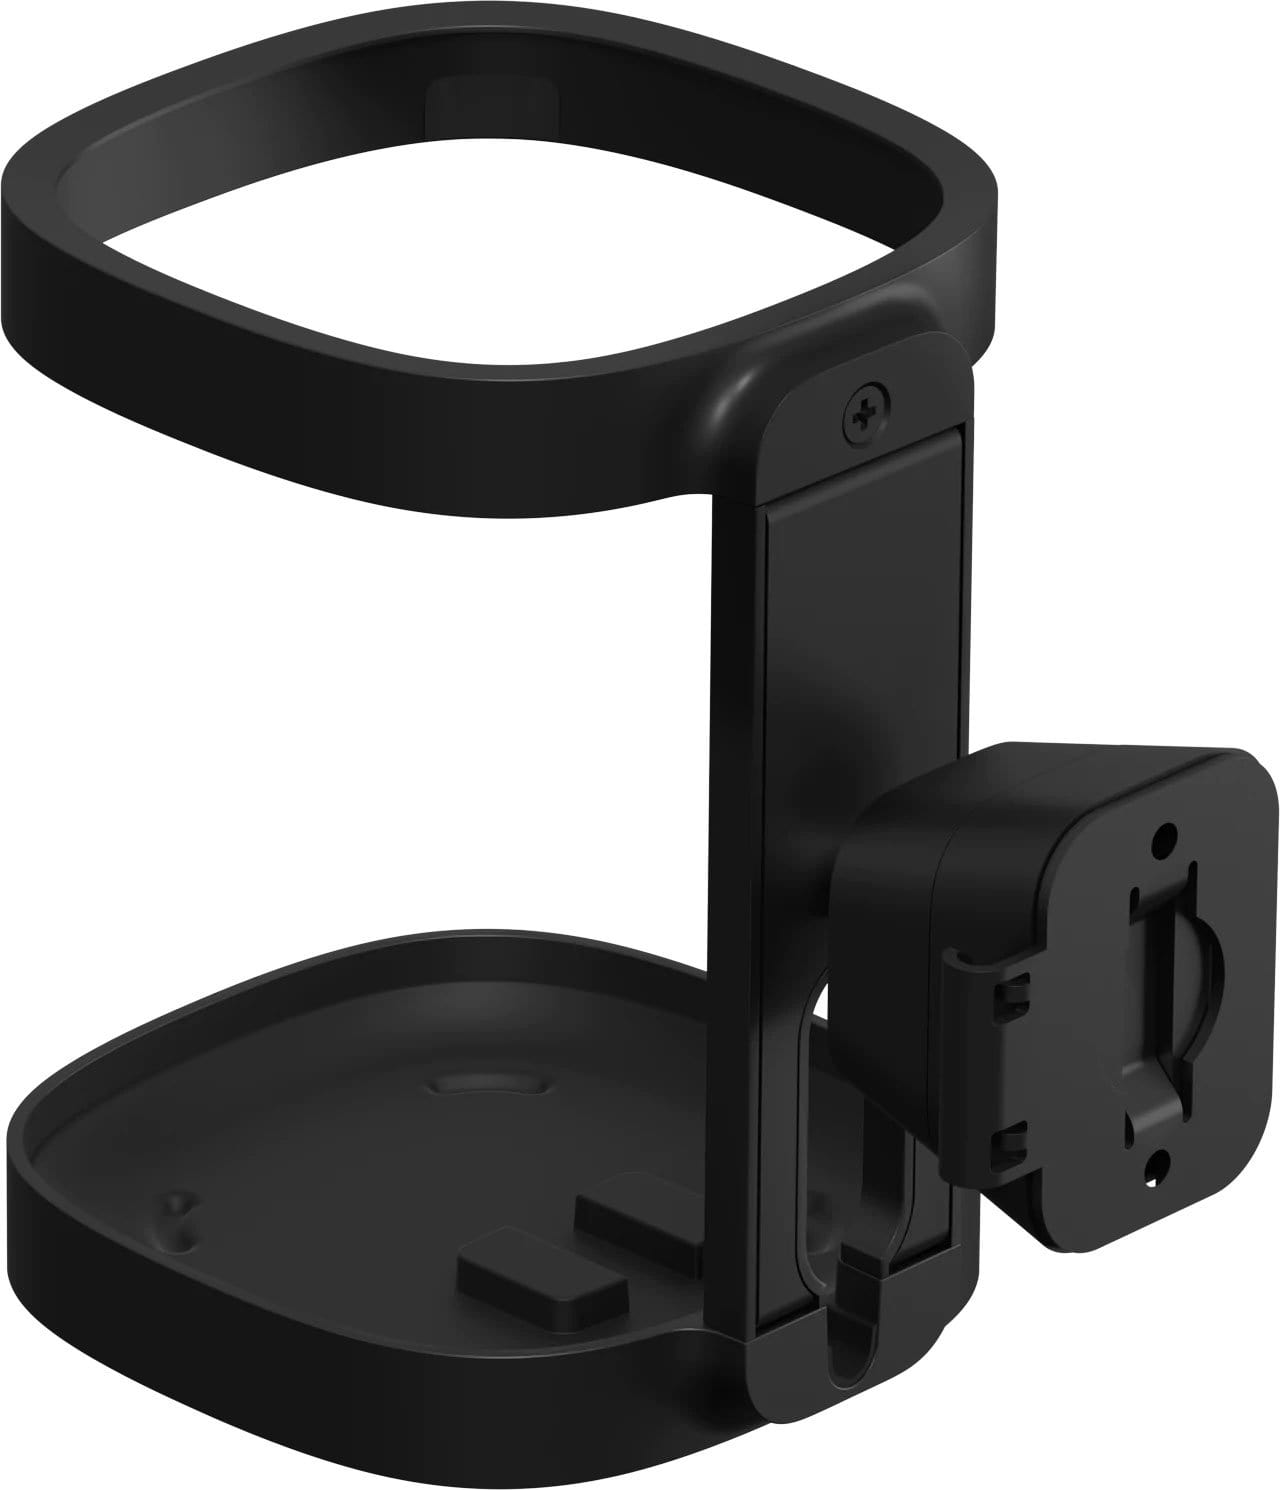 Sonos One Wall Mounts